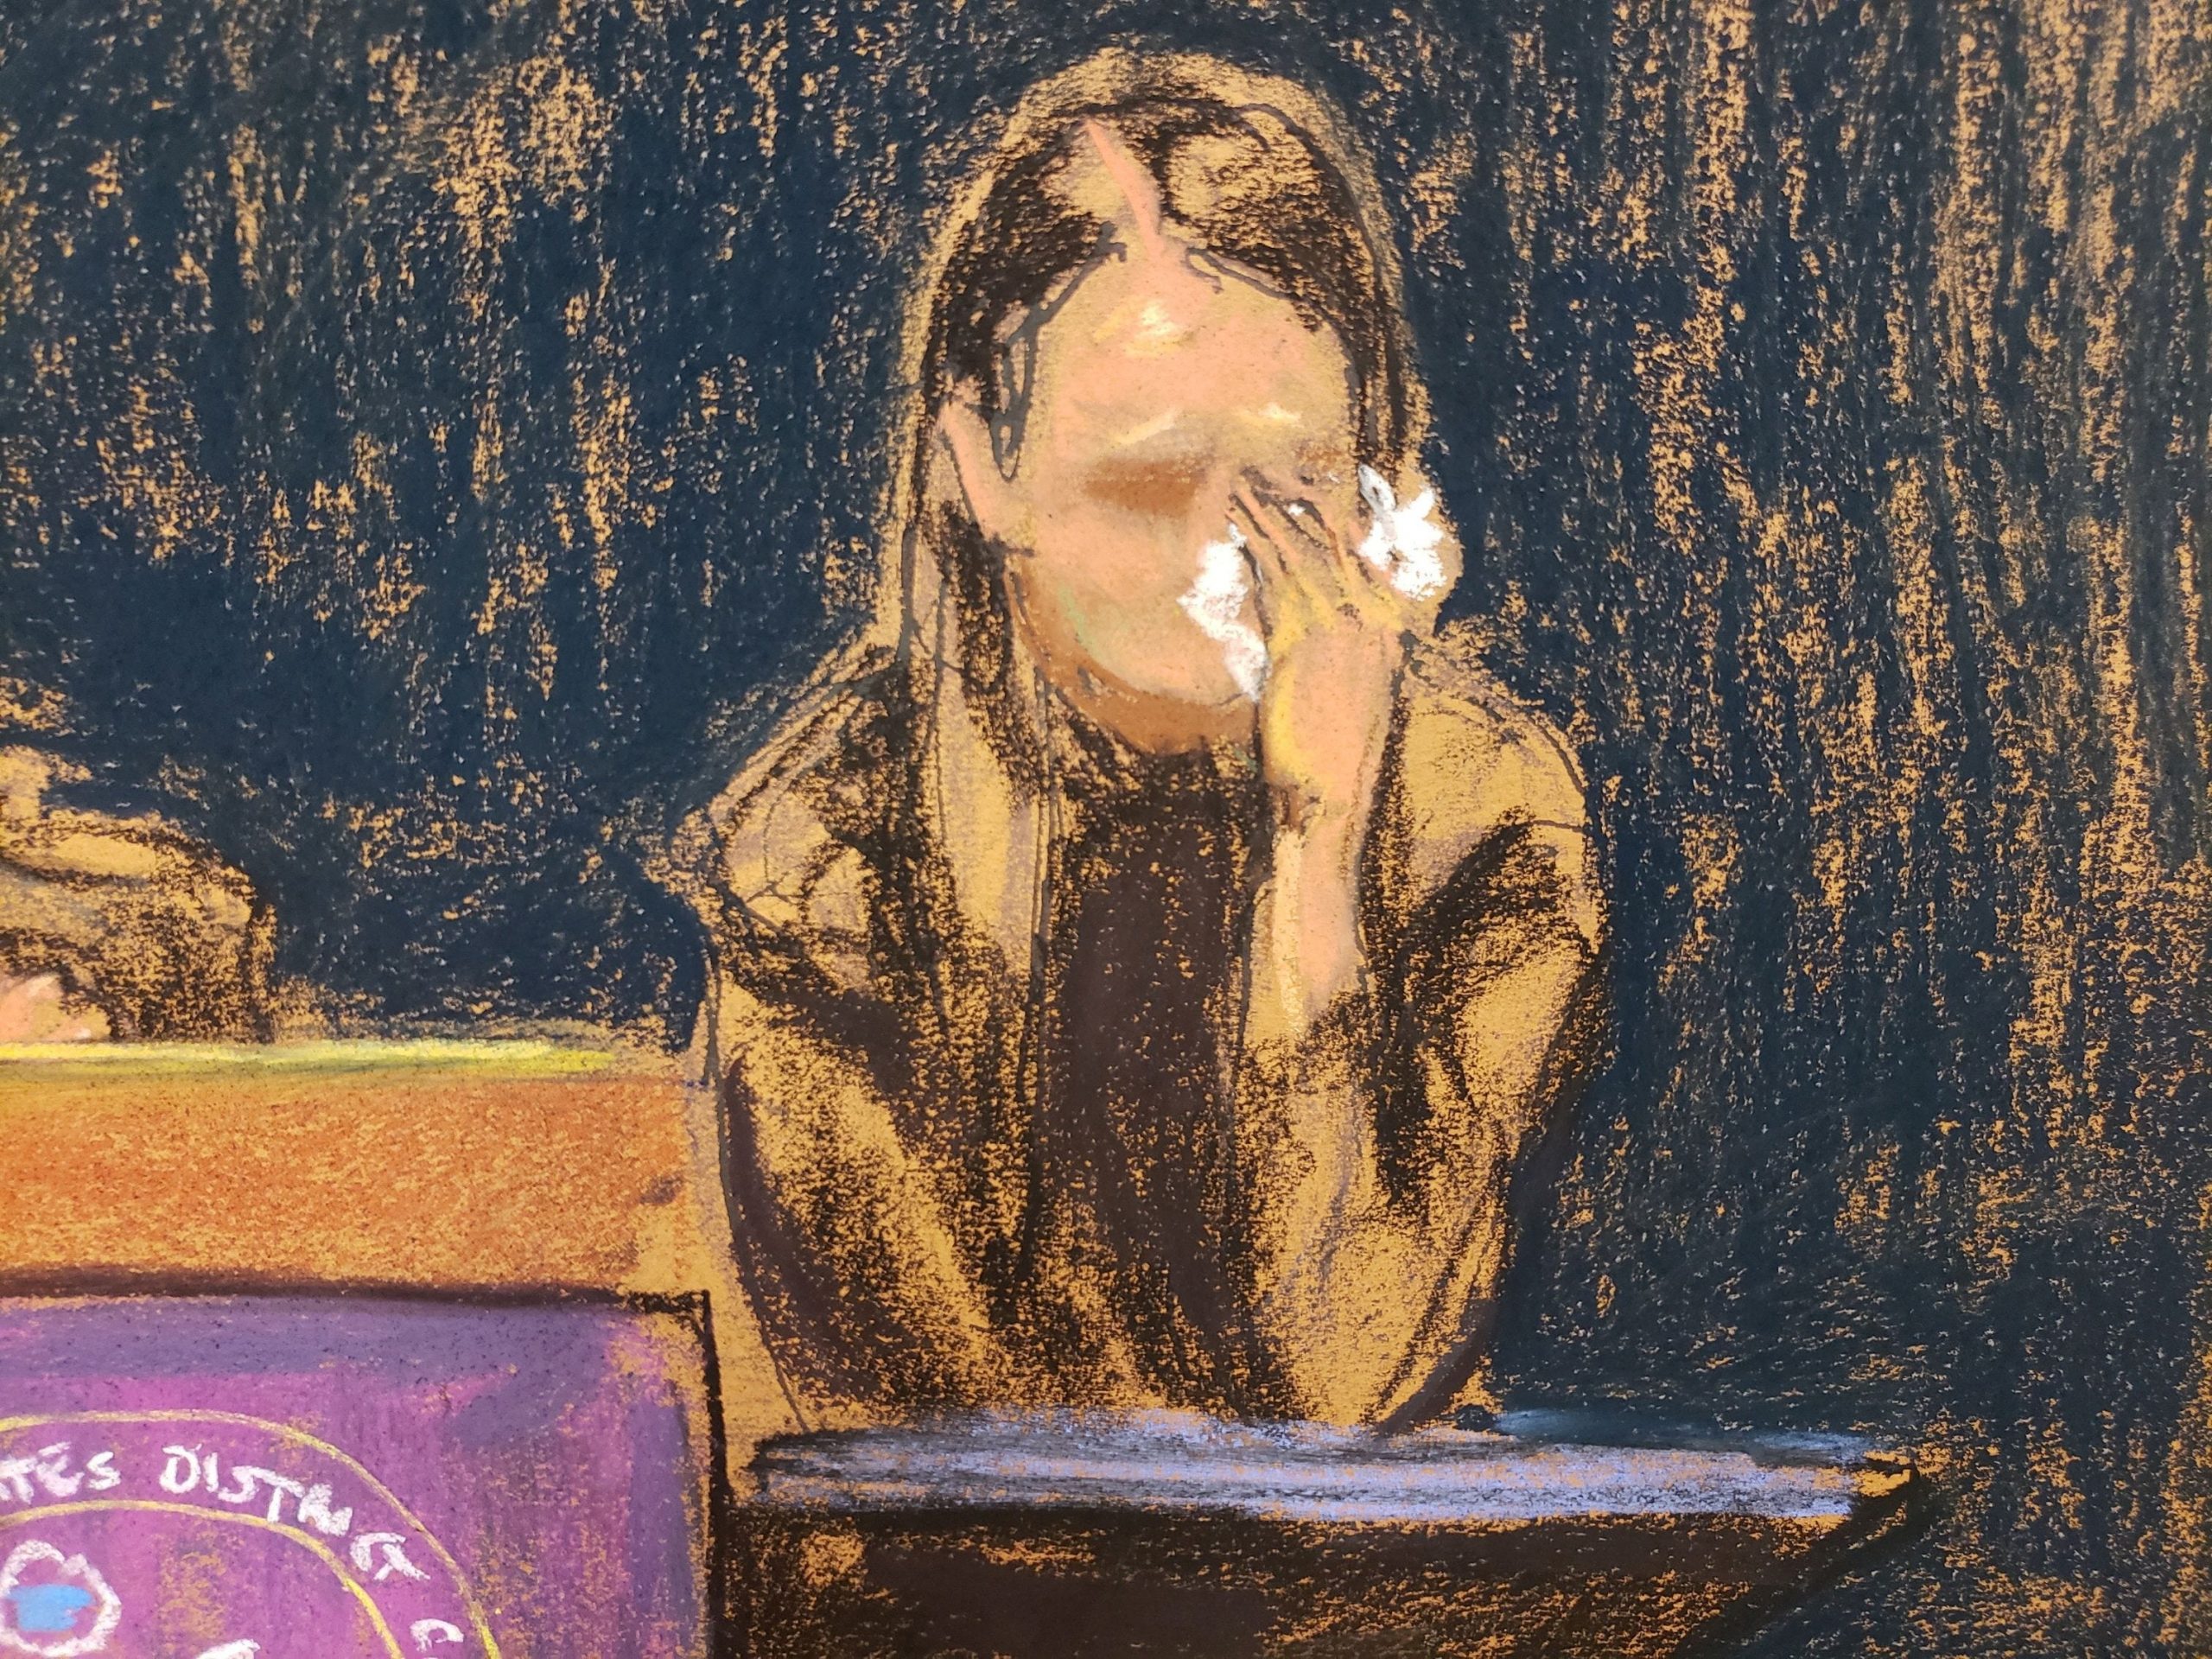 Witness "Jane" testifies during Ghislaine Maxwell's trial on charges of sex trafficking, in a courtroom sketch in New York City, US, November 30, 2021.